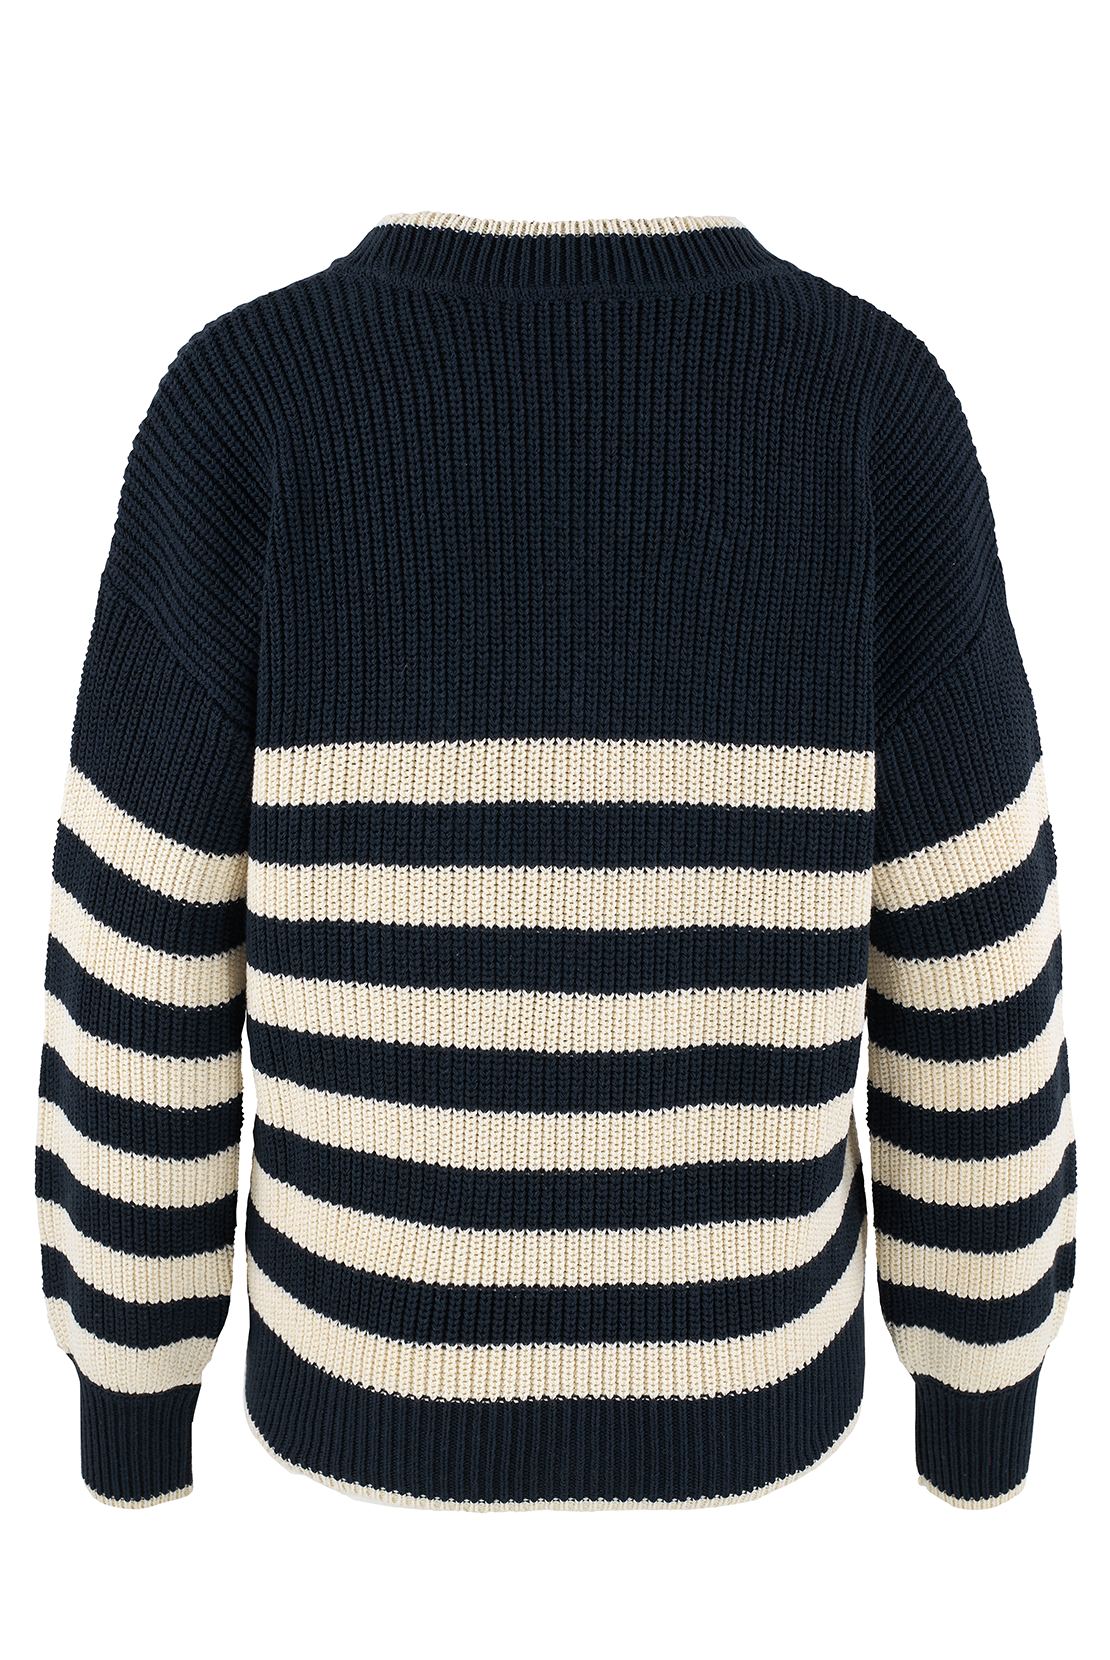 O&F Stripe Jumper with Heart Embroidery